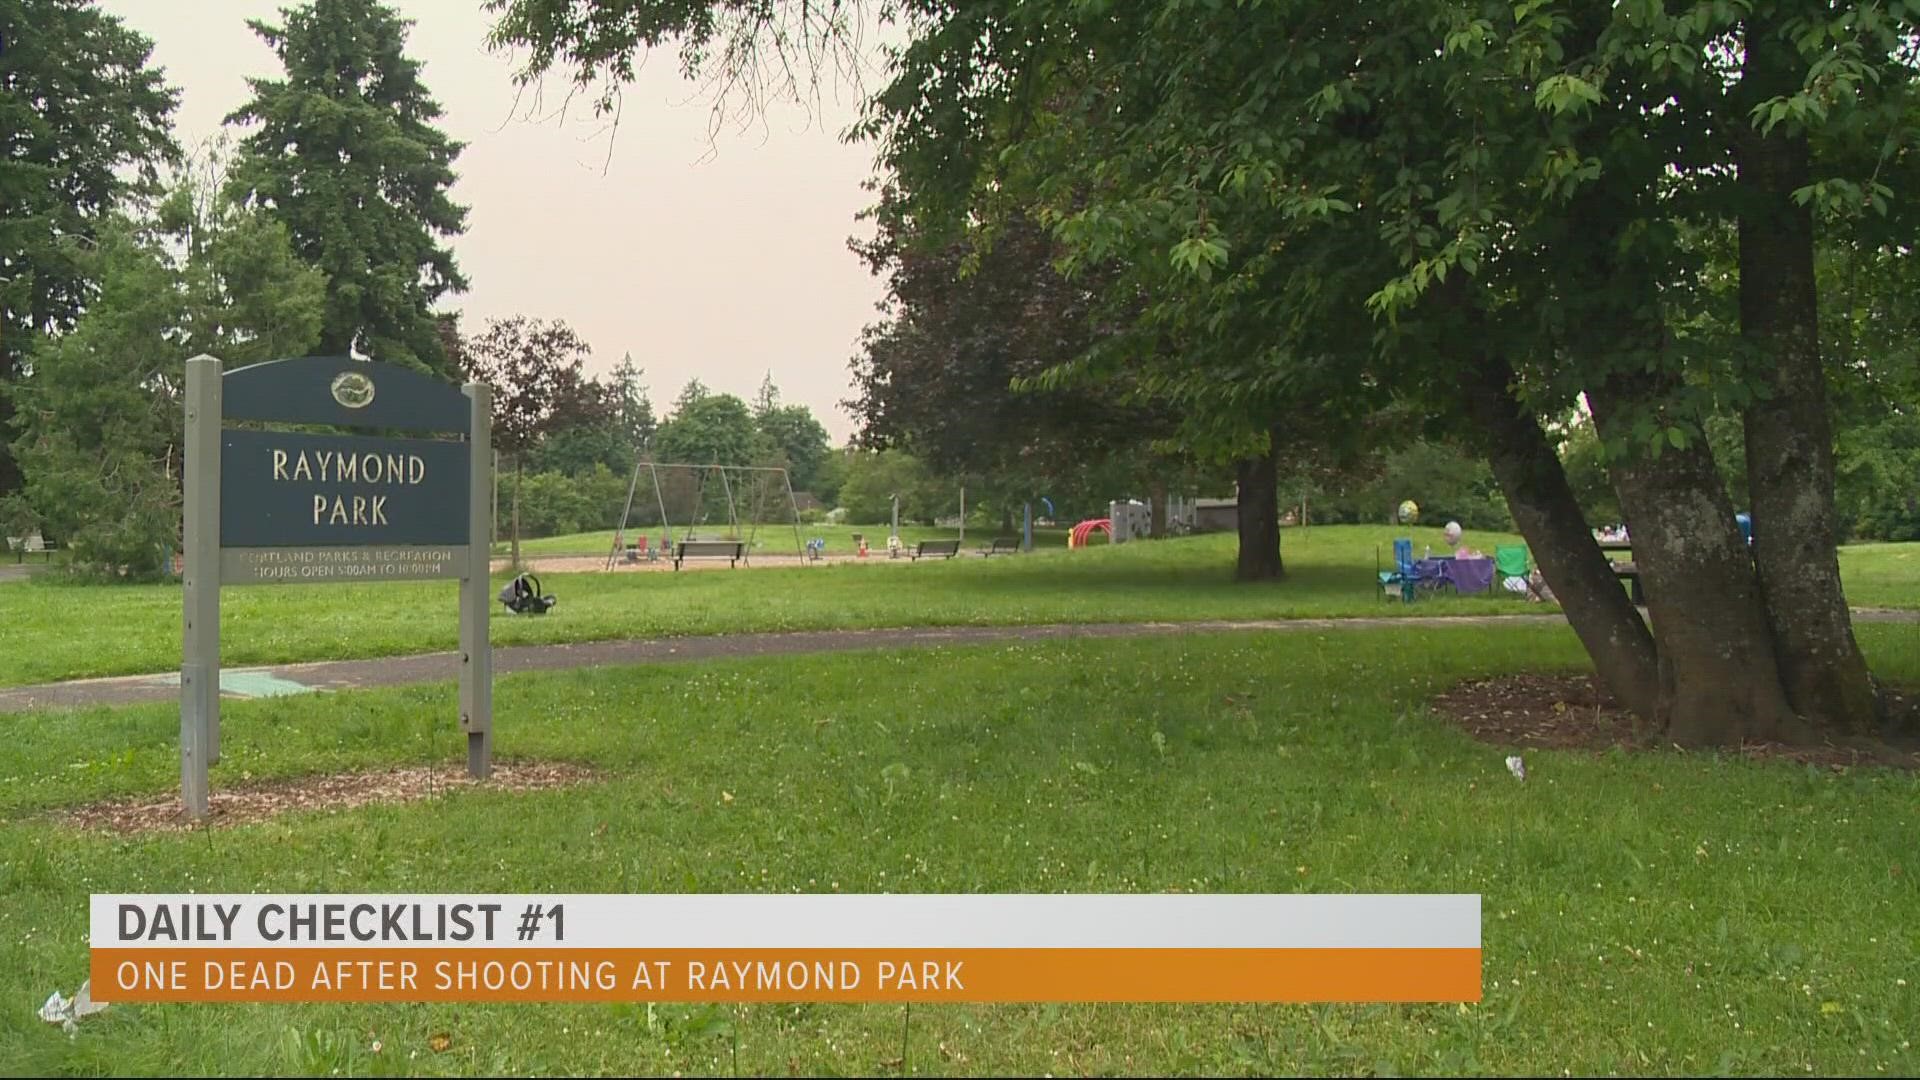 A sergeant found a man dead after a reported shooting in Raymond City Park in Southeast Portland Monday night. Police have not made any arrests in the case.